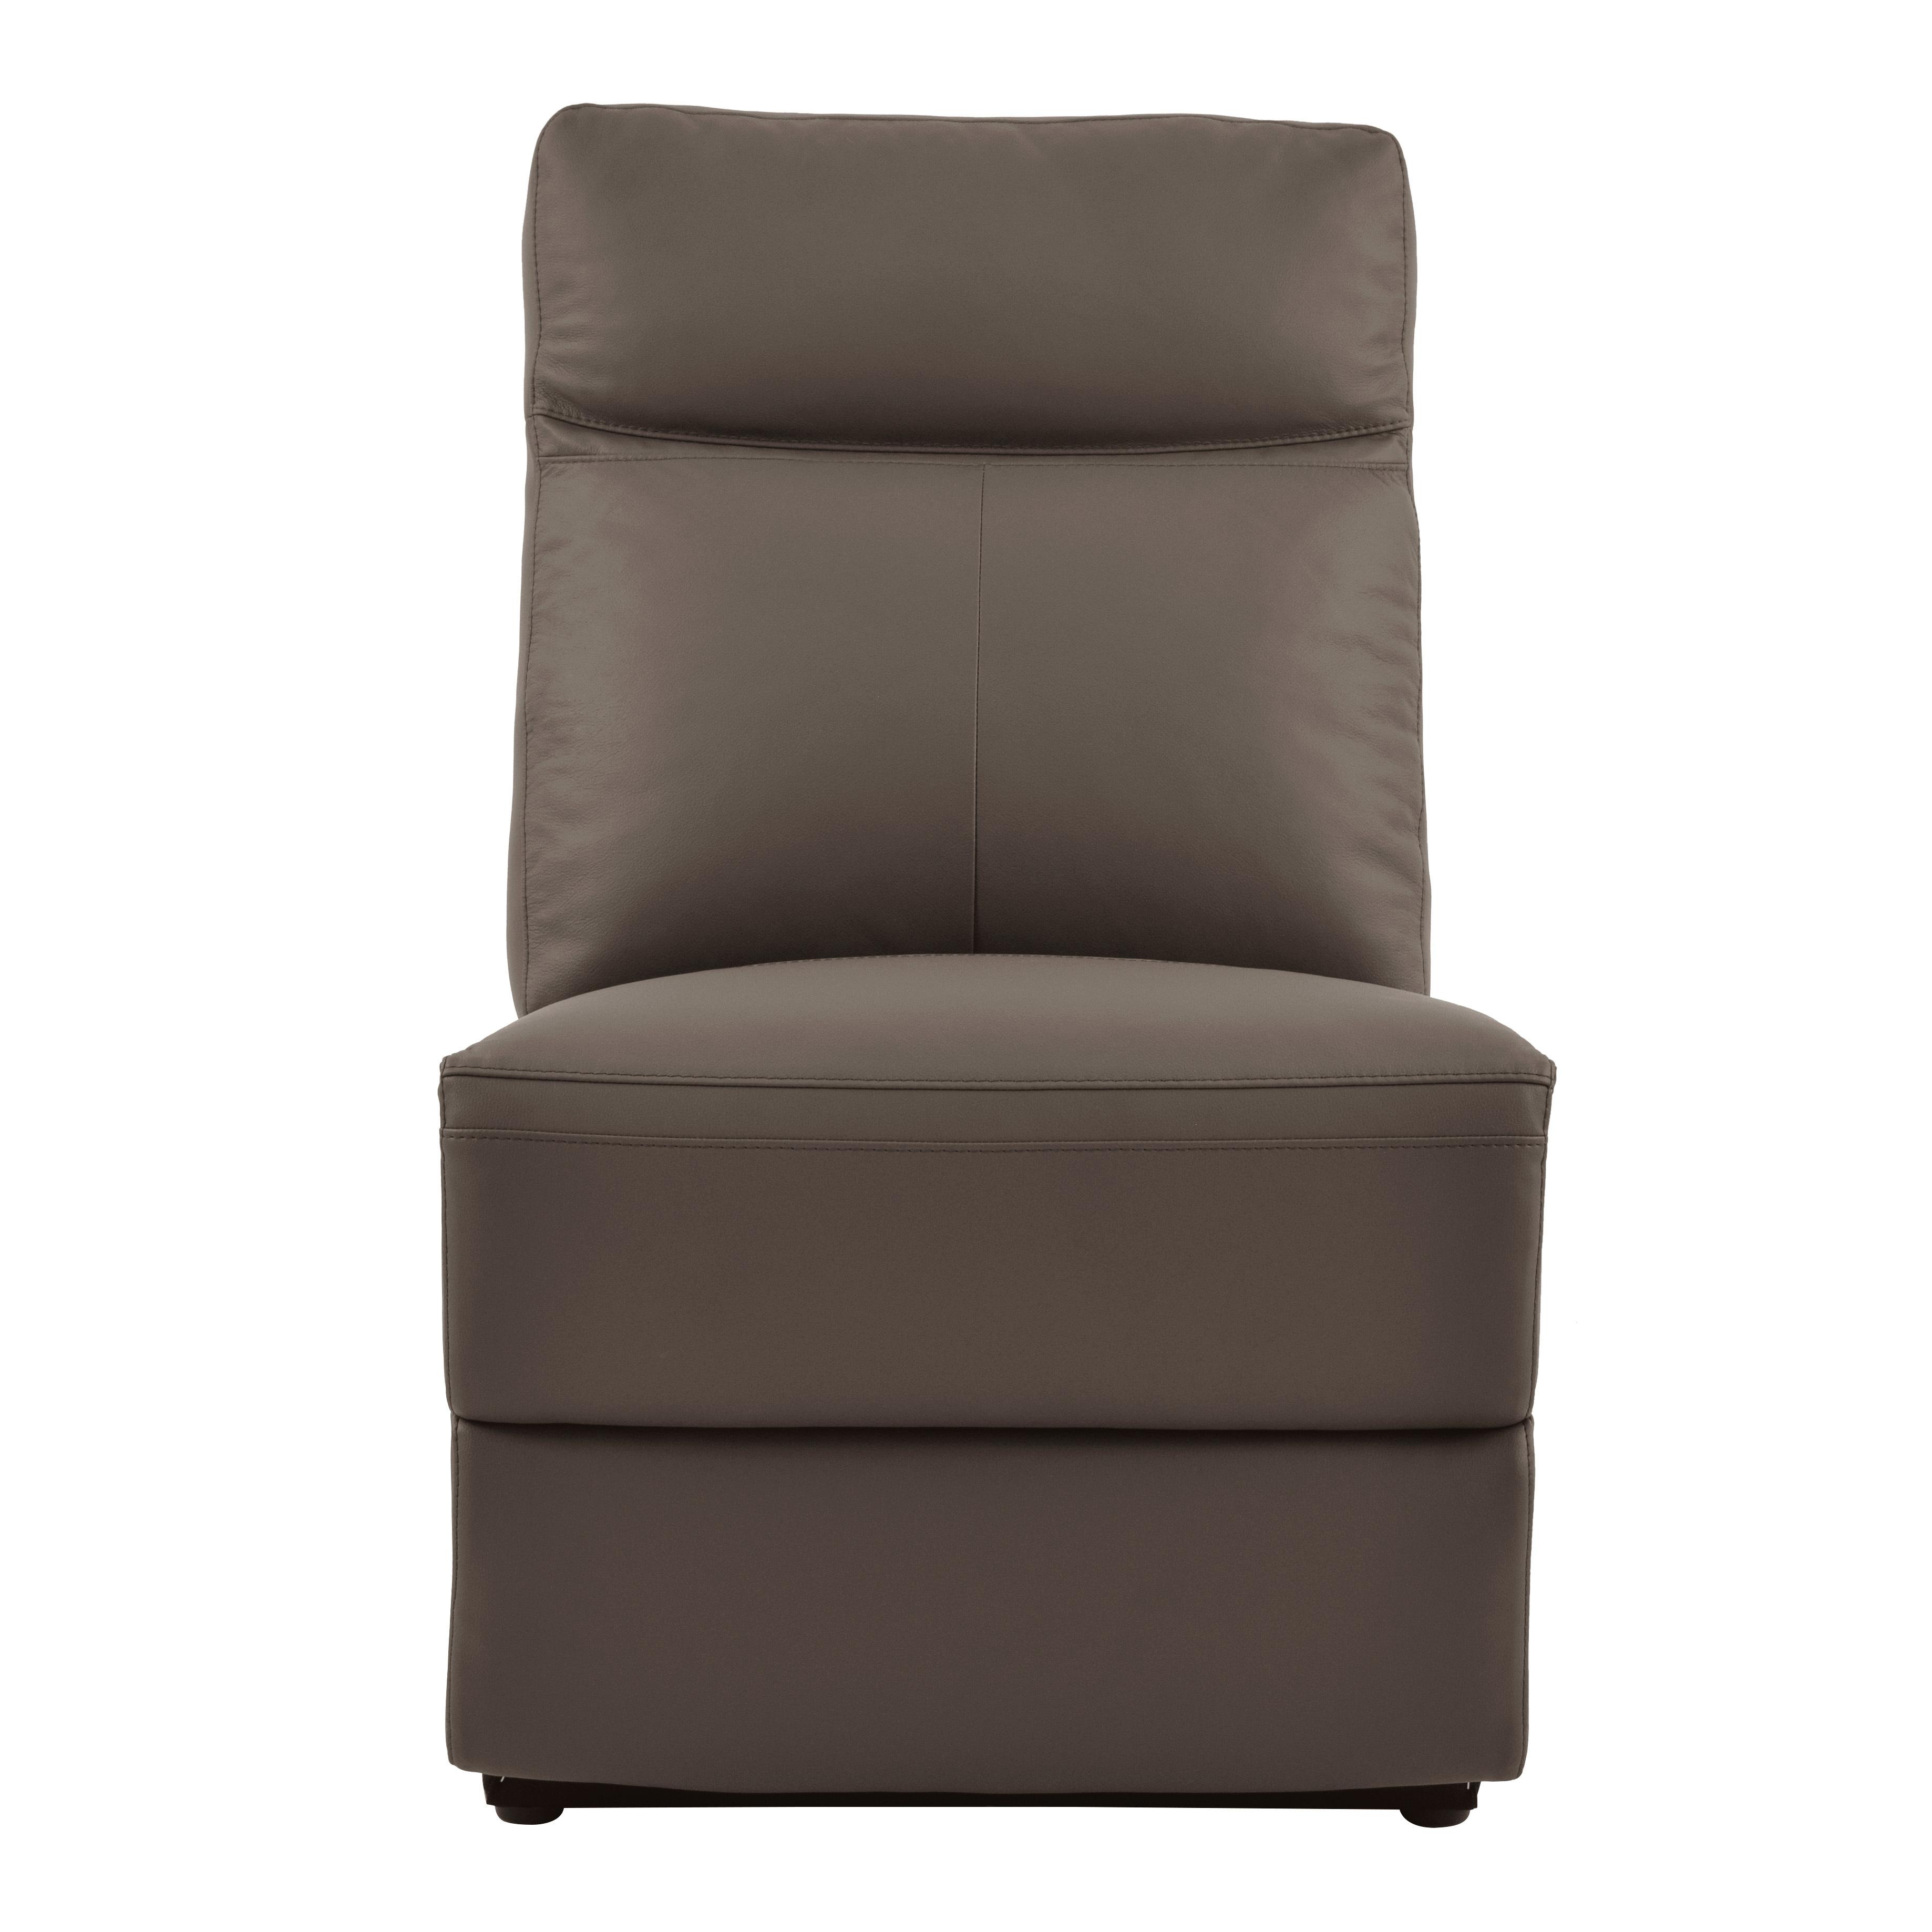 Contemporary Armless Chair 8308-AC Olympia 8308-AC in Brown Top grain leather